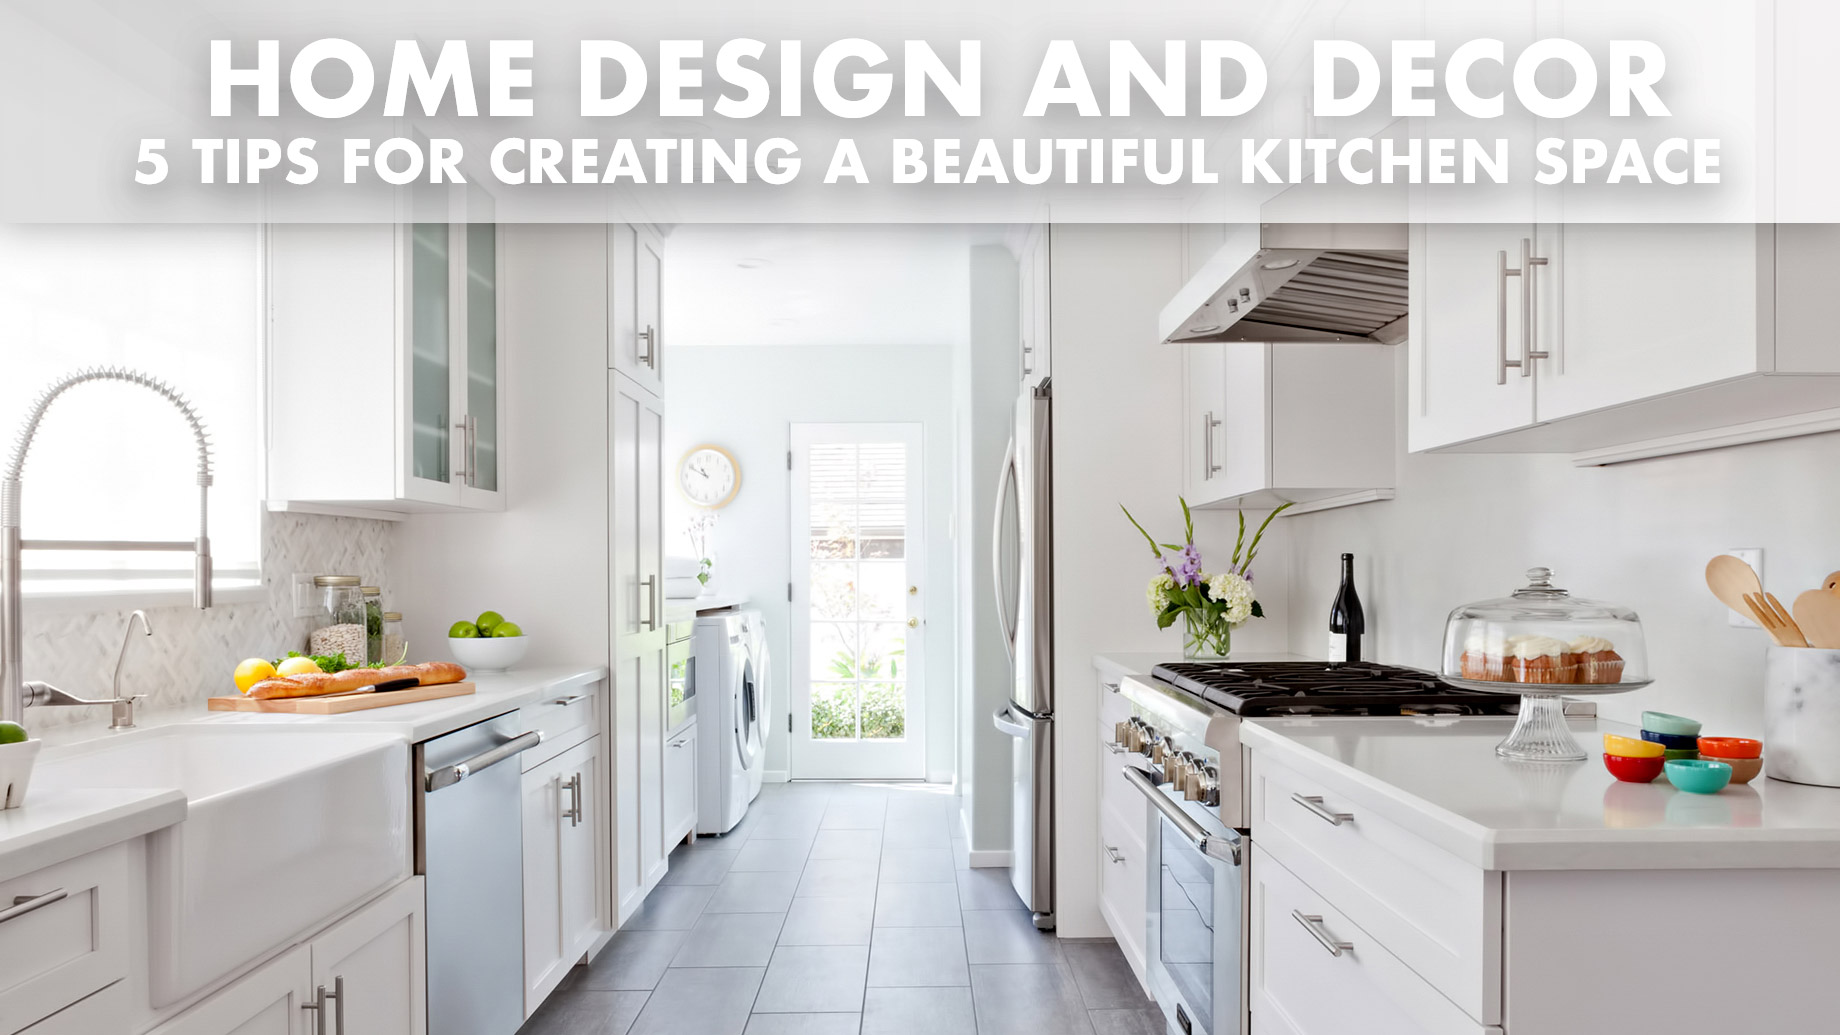 Home Design and Decor – 5 Tips for Creating a Beautiful Kitchen Space